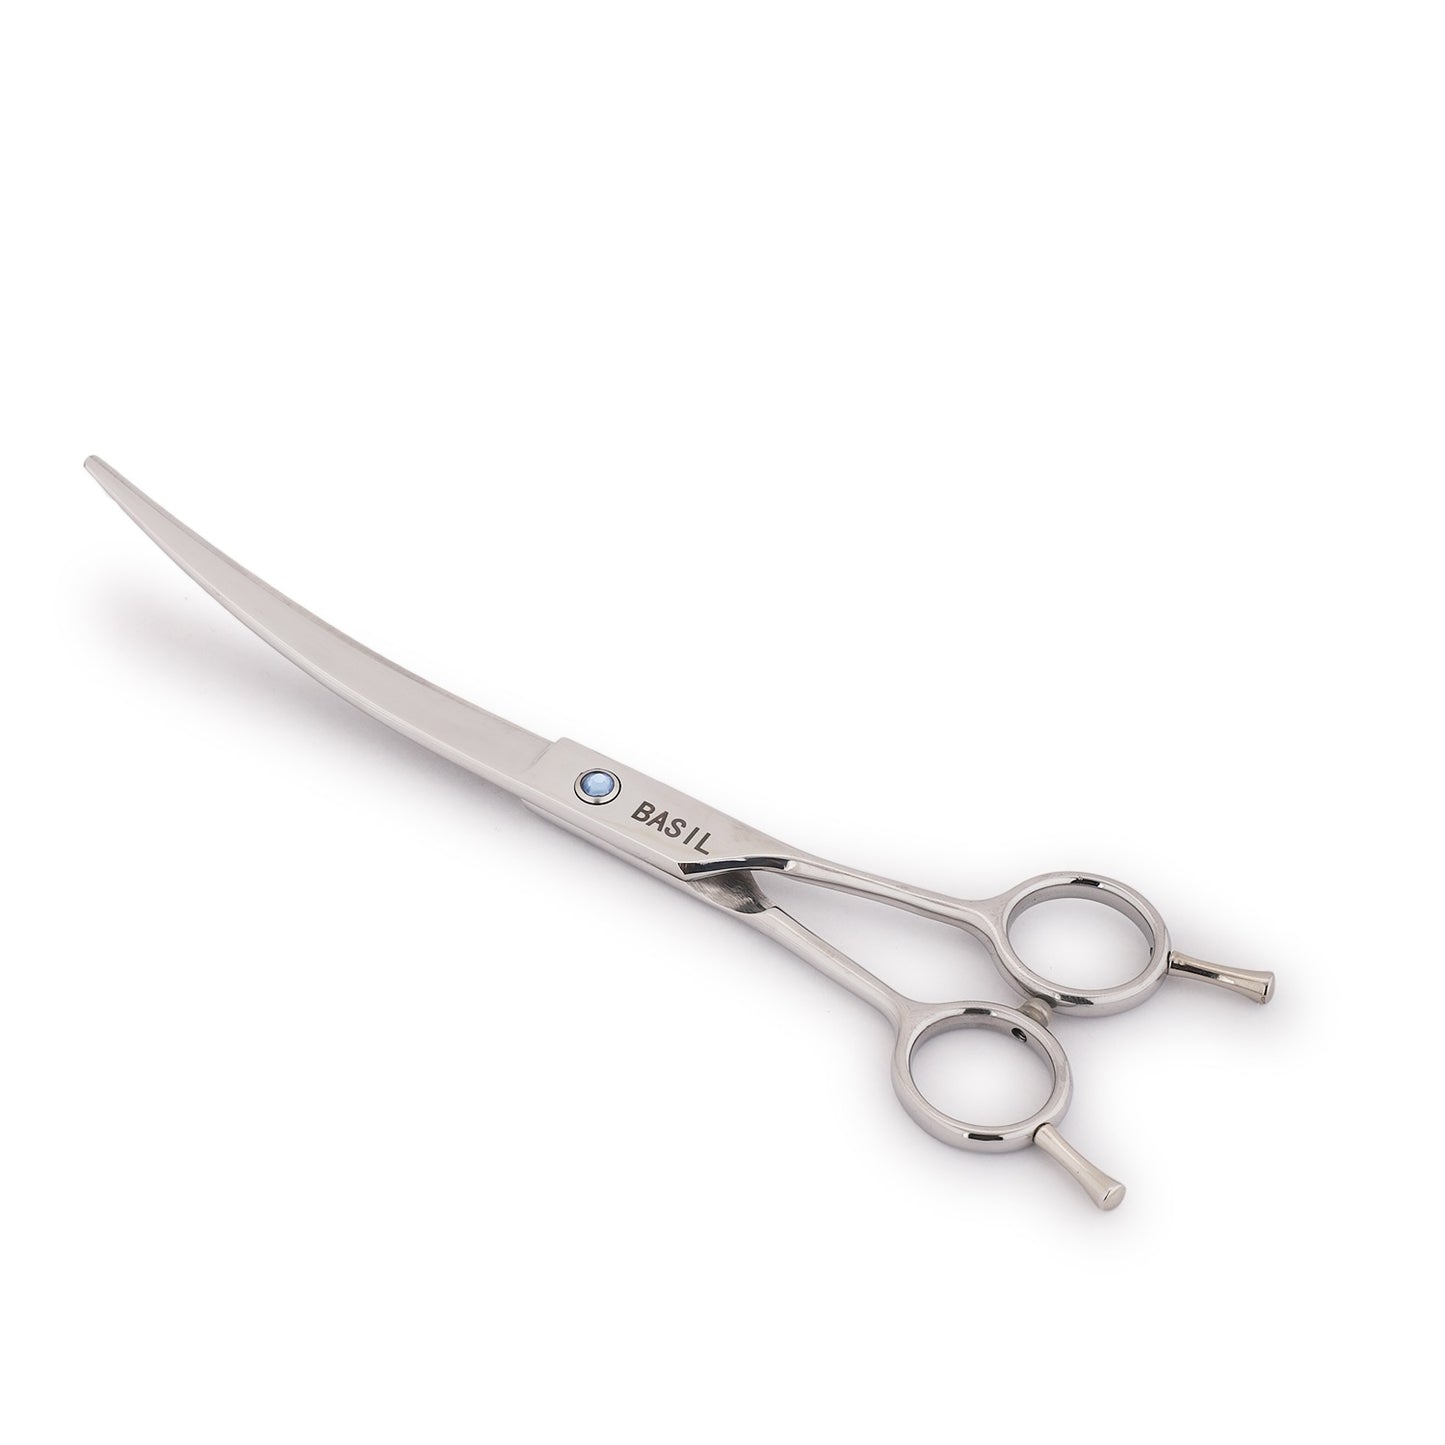 Basil Curved Pro Scissors For Pets